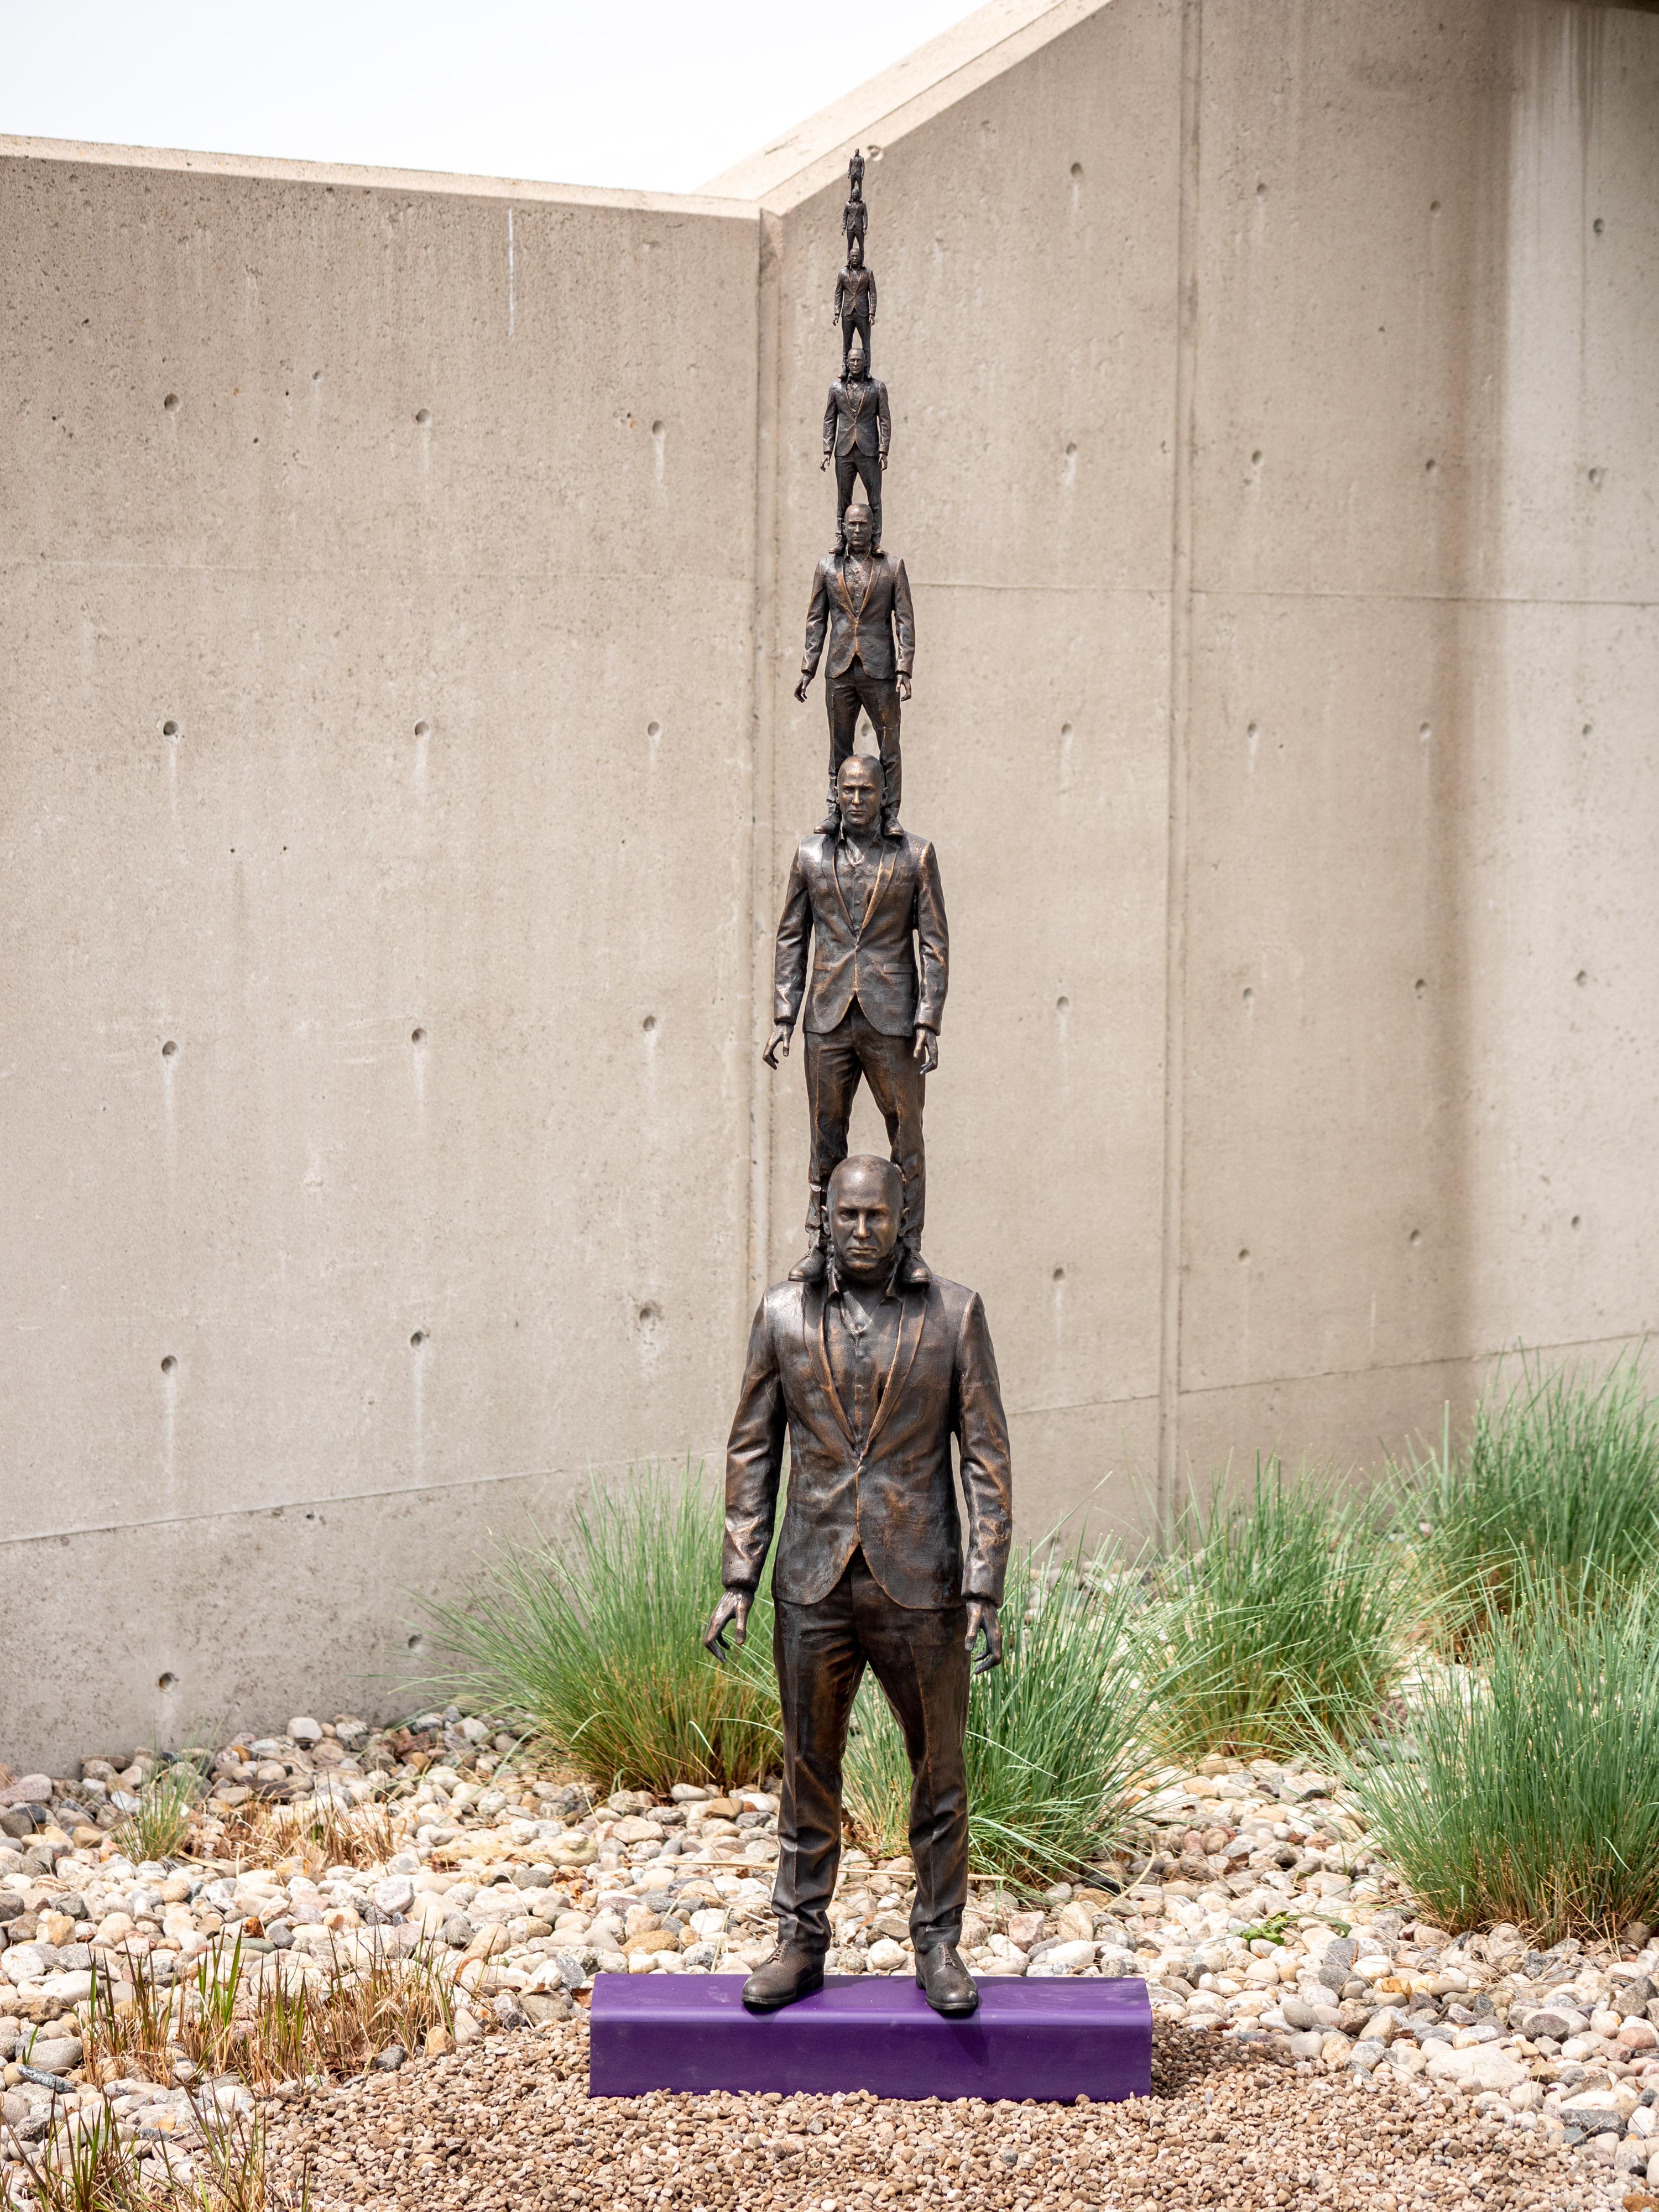 Evolution of a Vantage Point 1/4 - Seven bronze suited men in diminishing size